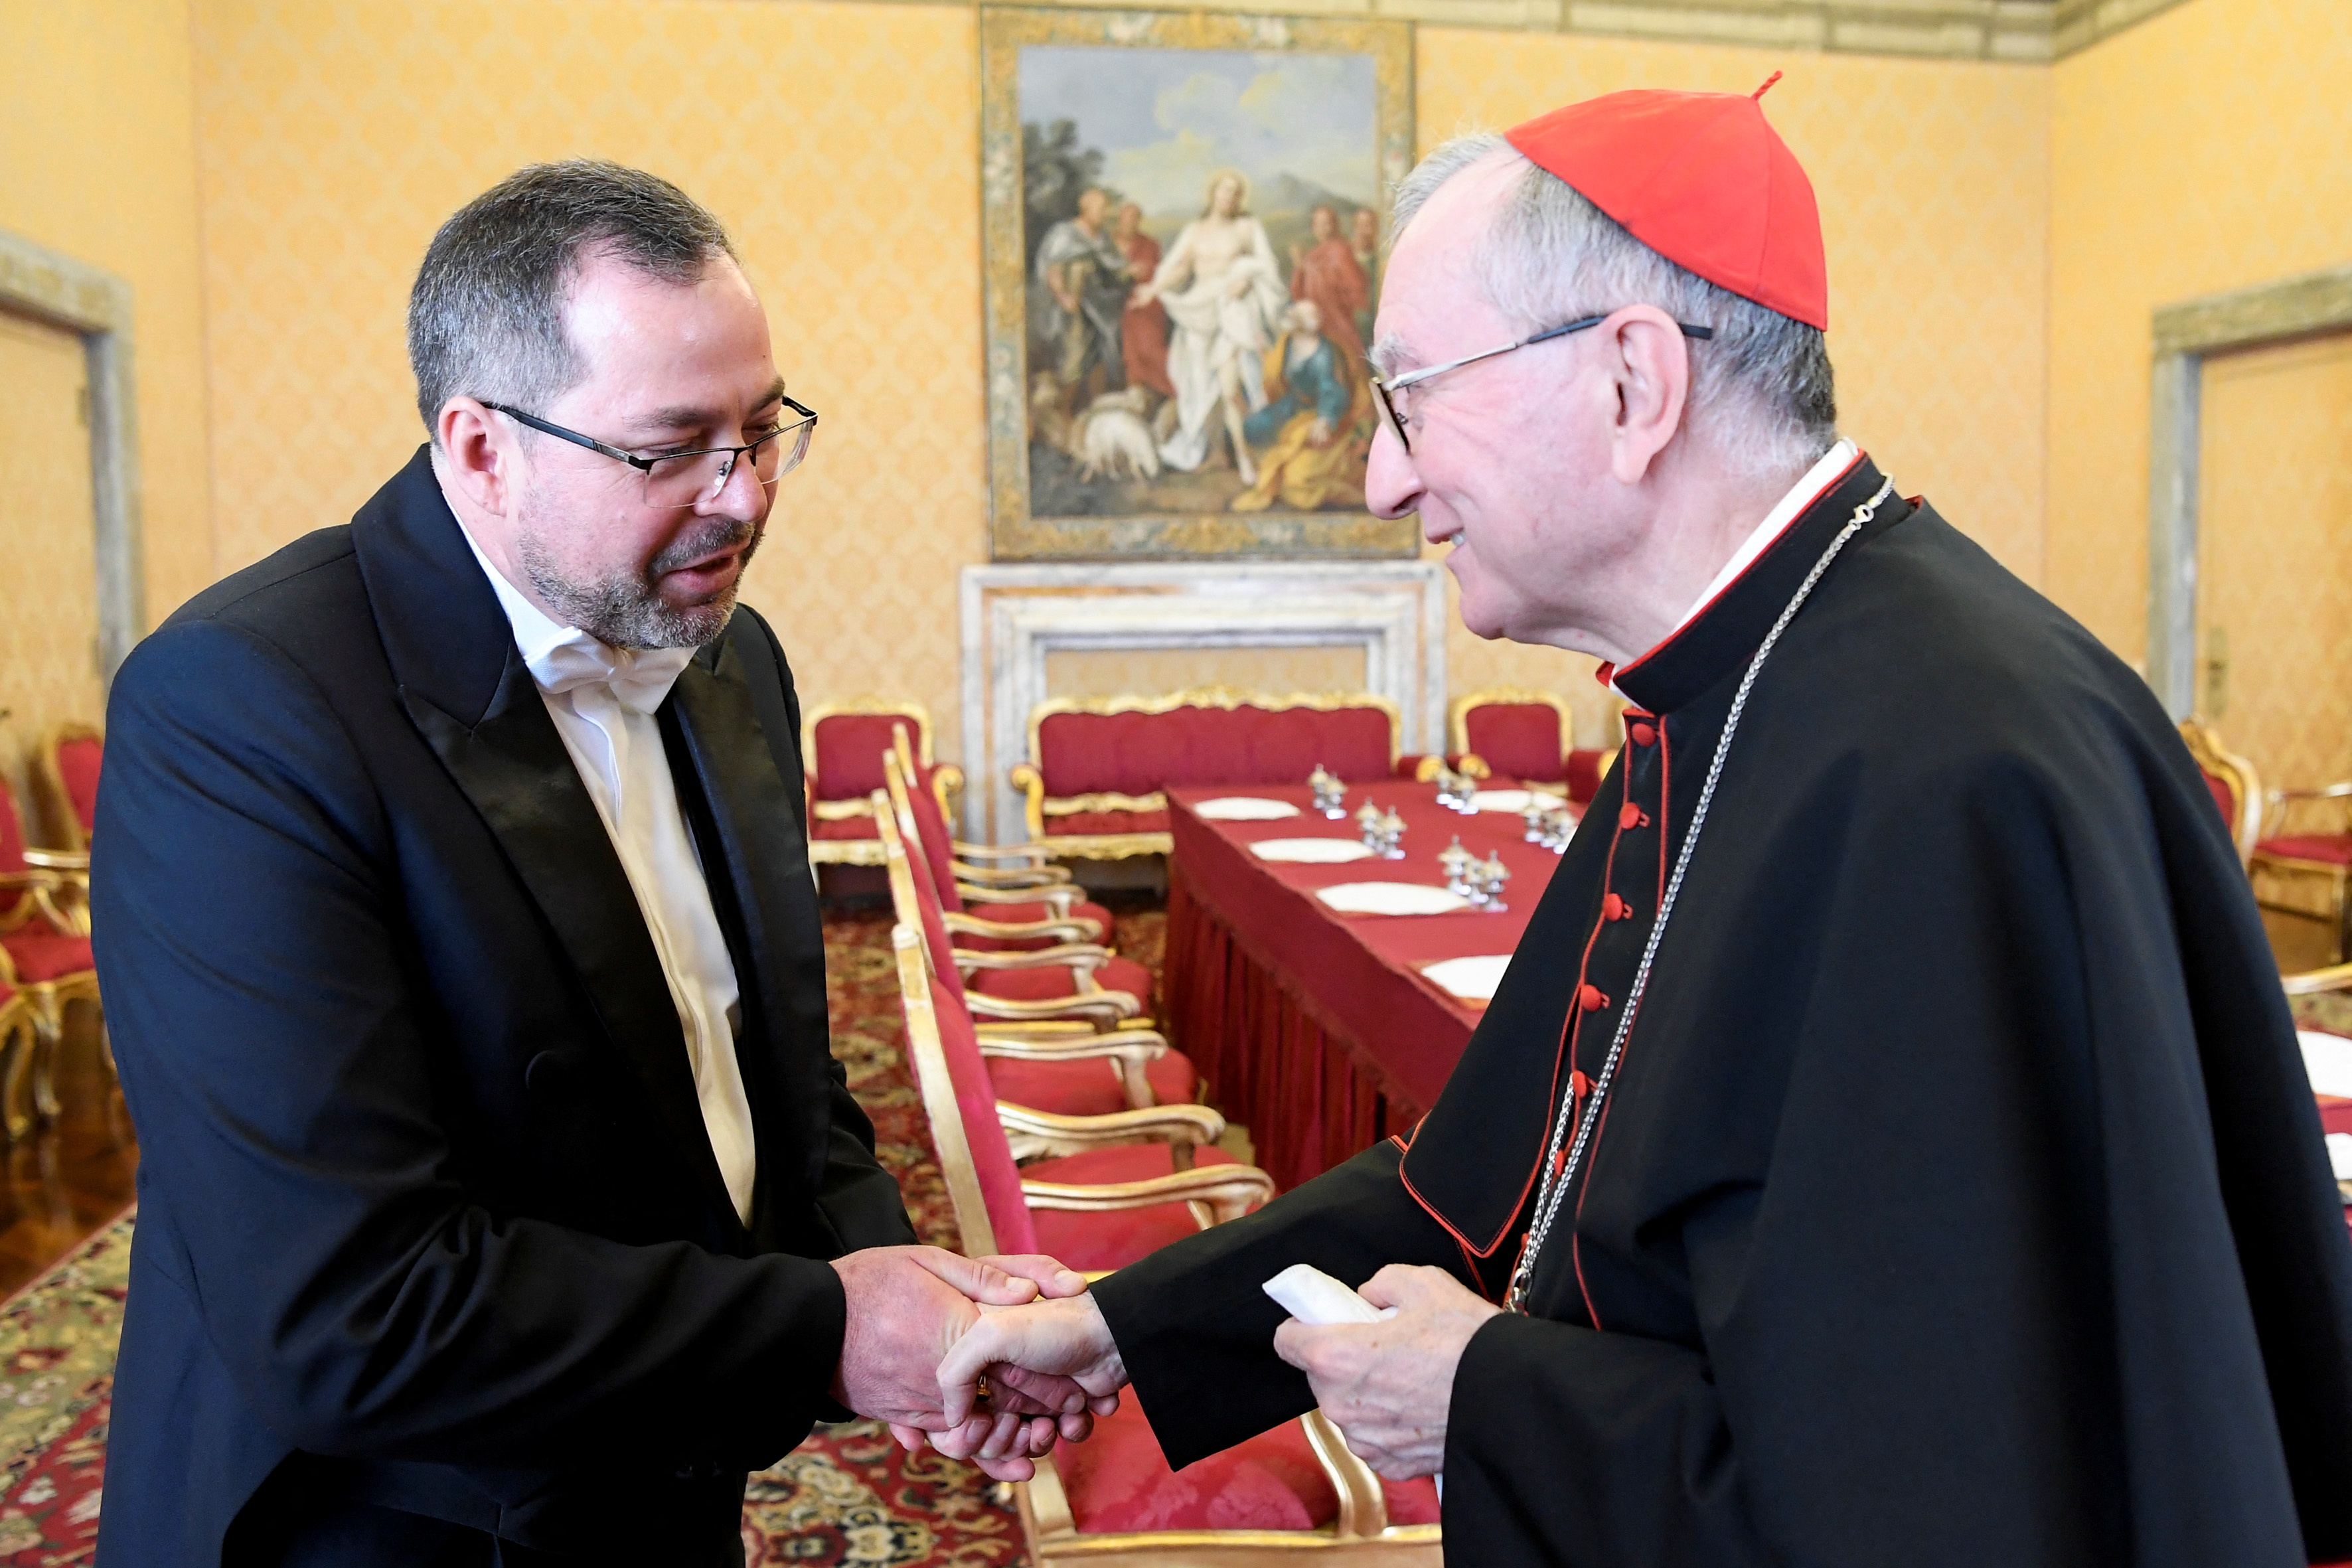 Vatican's Secretary of State, Cardinal Pietro Parolin shakes hand with Ukraine's ambassador to the Vatican, Andriy Yurash during a private audience at the Vatican